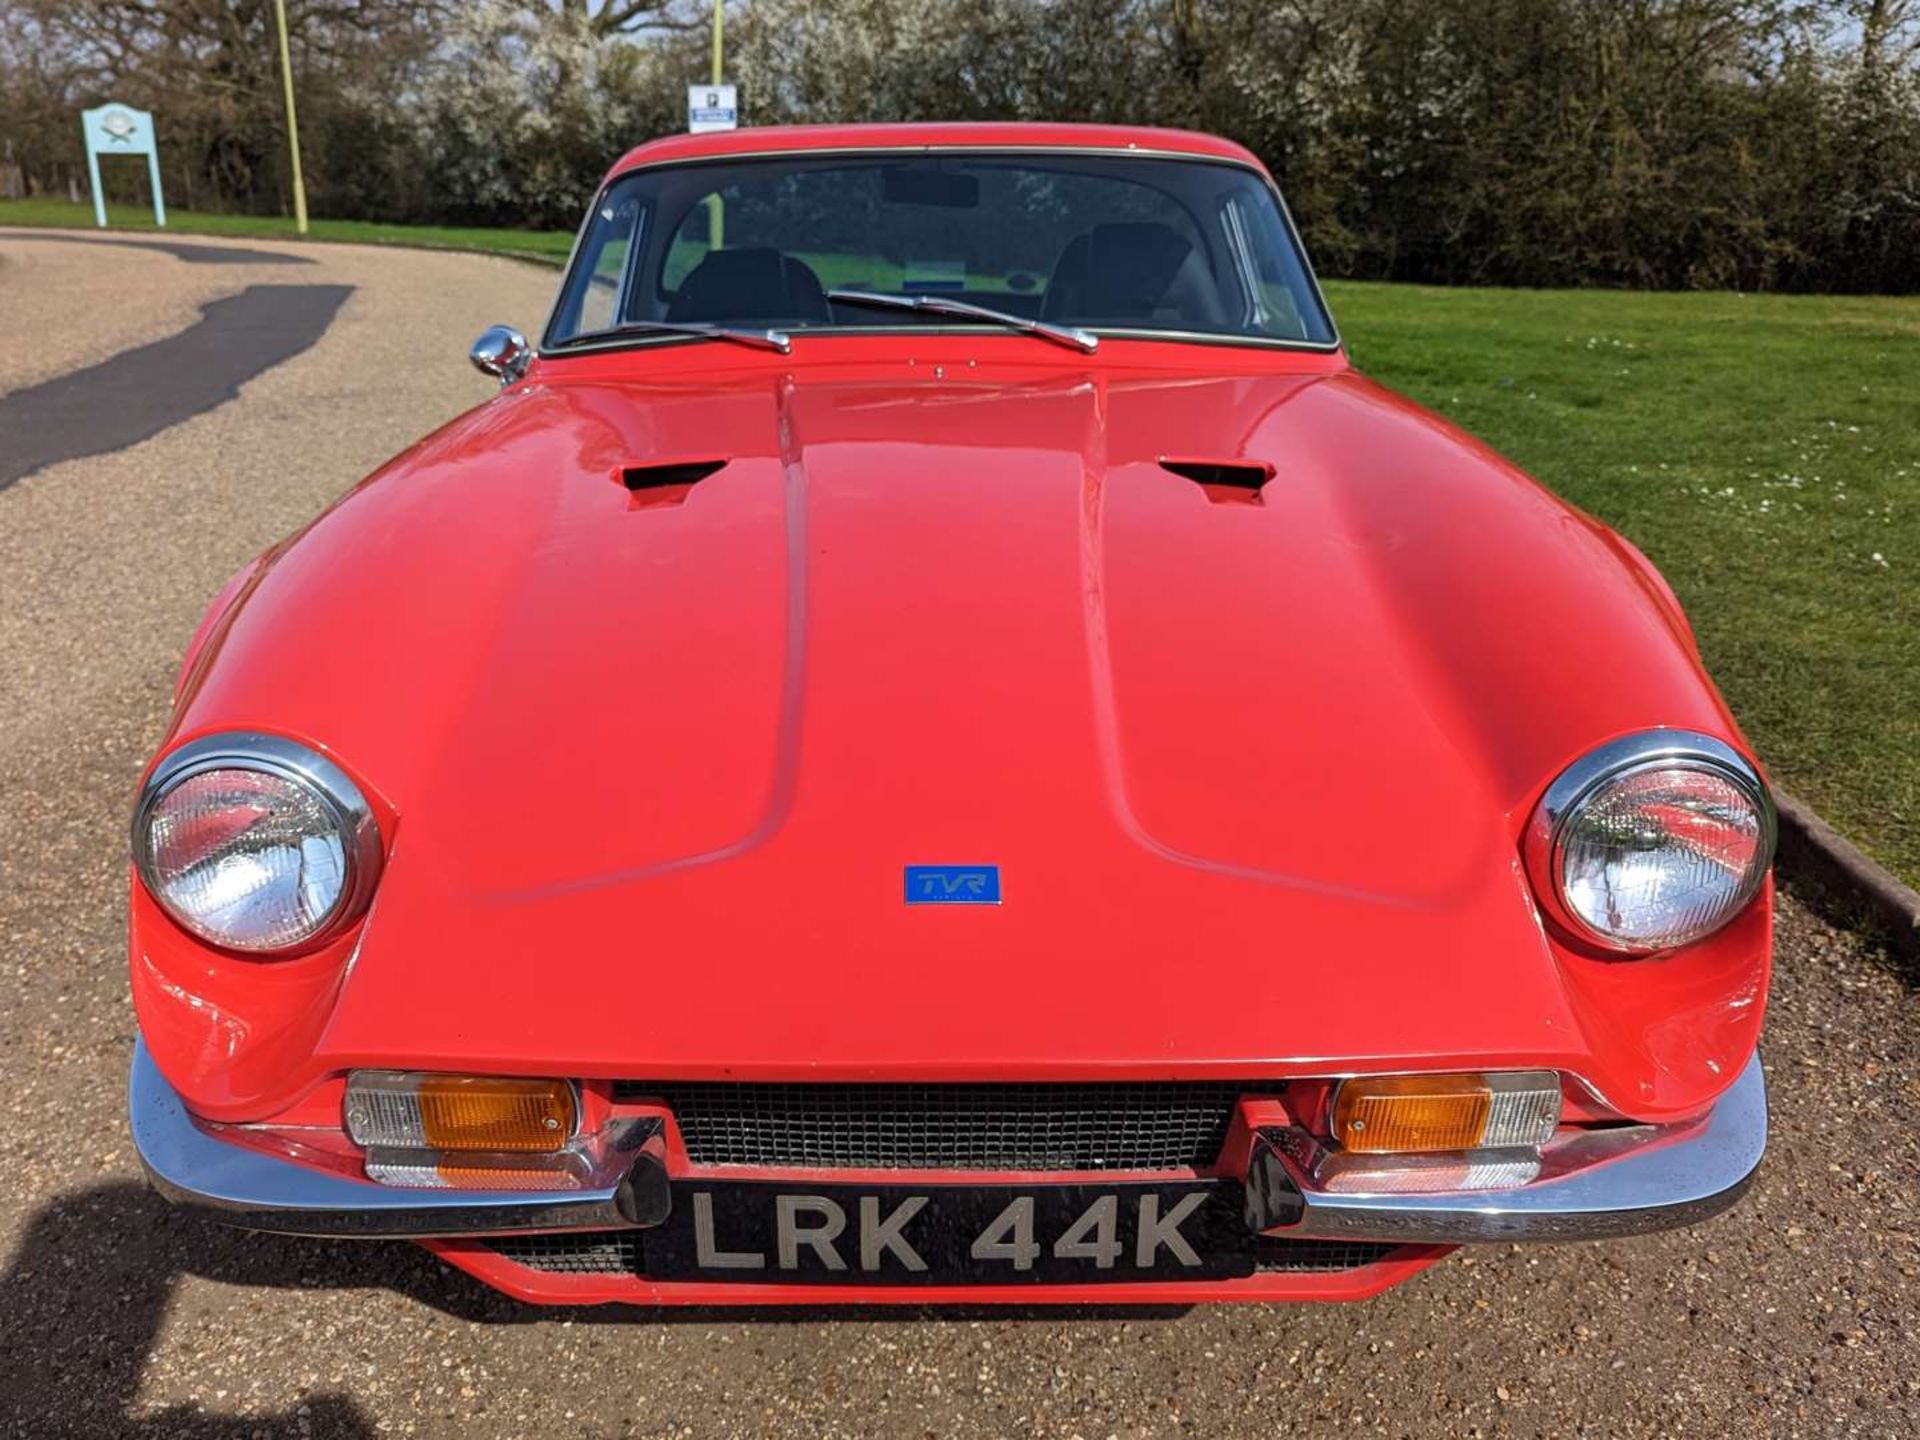 1972 TVR 2500M - Image 2 of 27